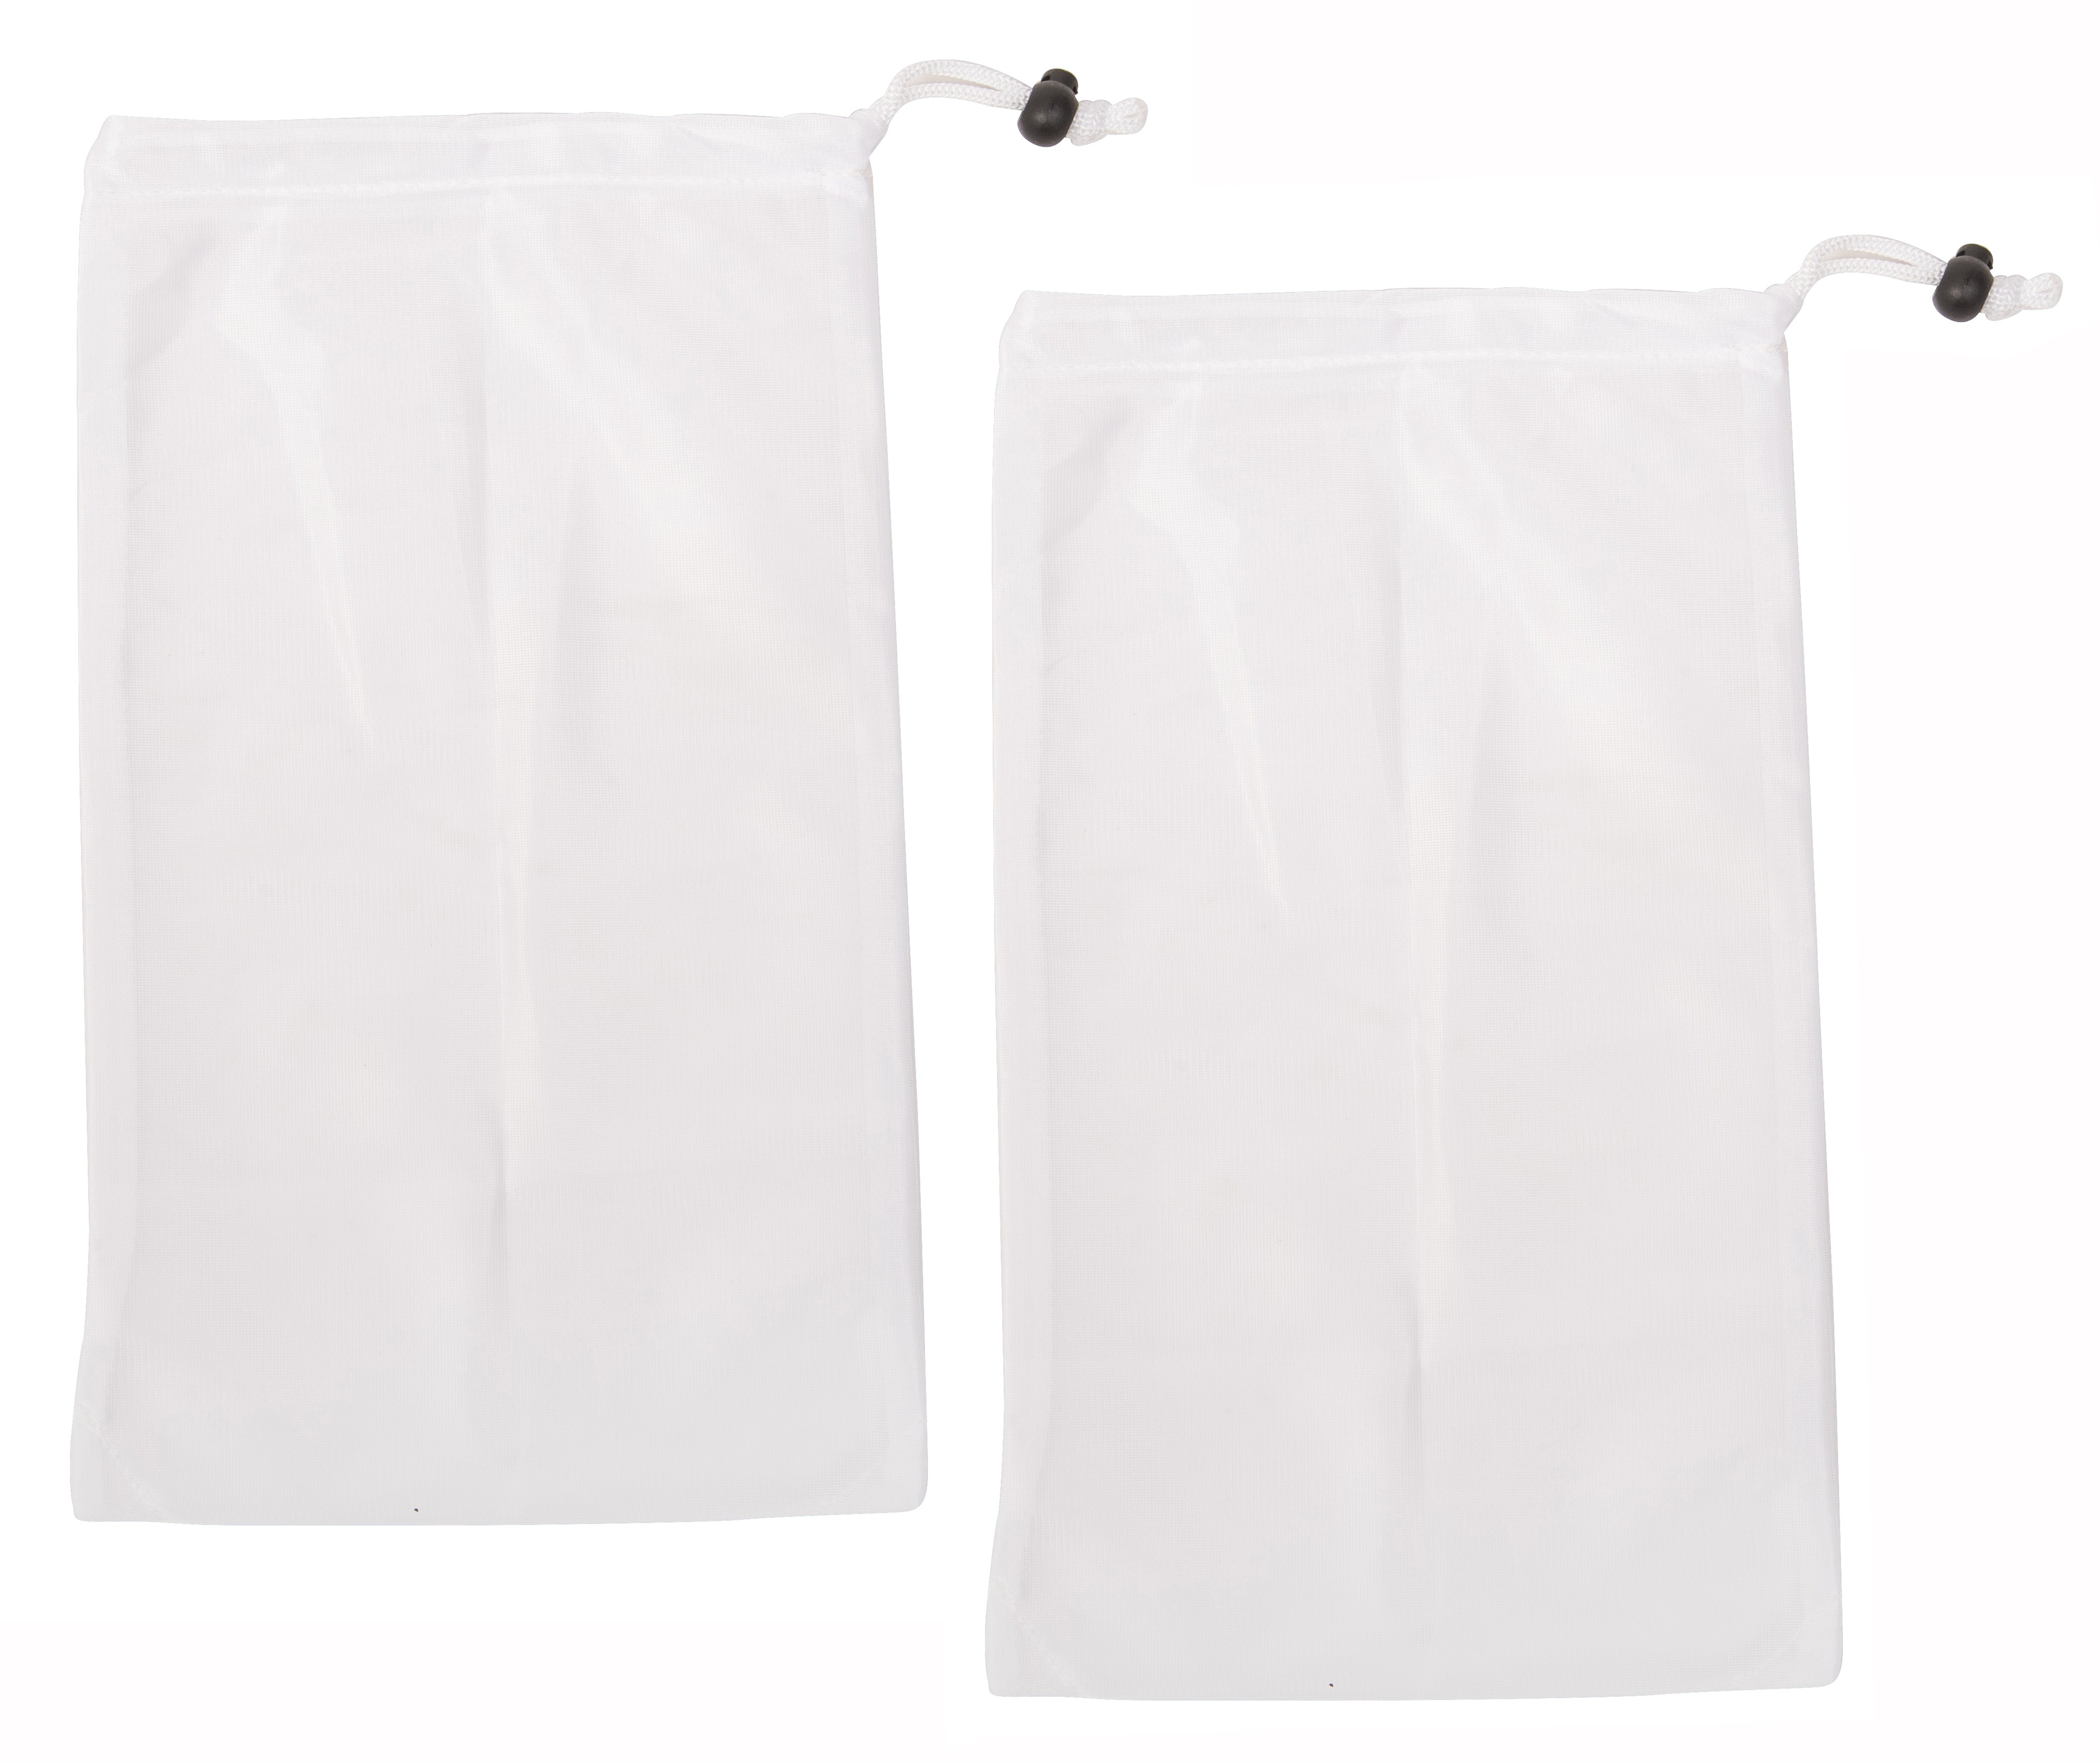 Replacement Bag for Small Vacuums for Spas and Swimming Pools - 2 Pack